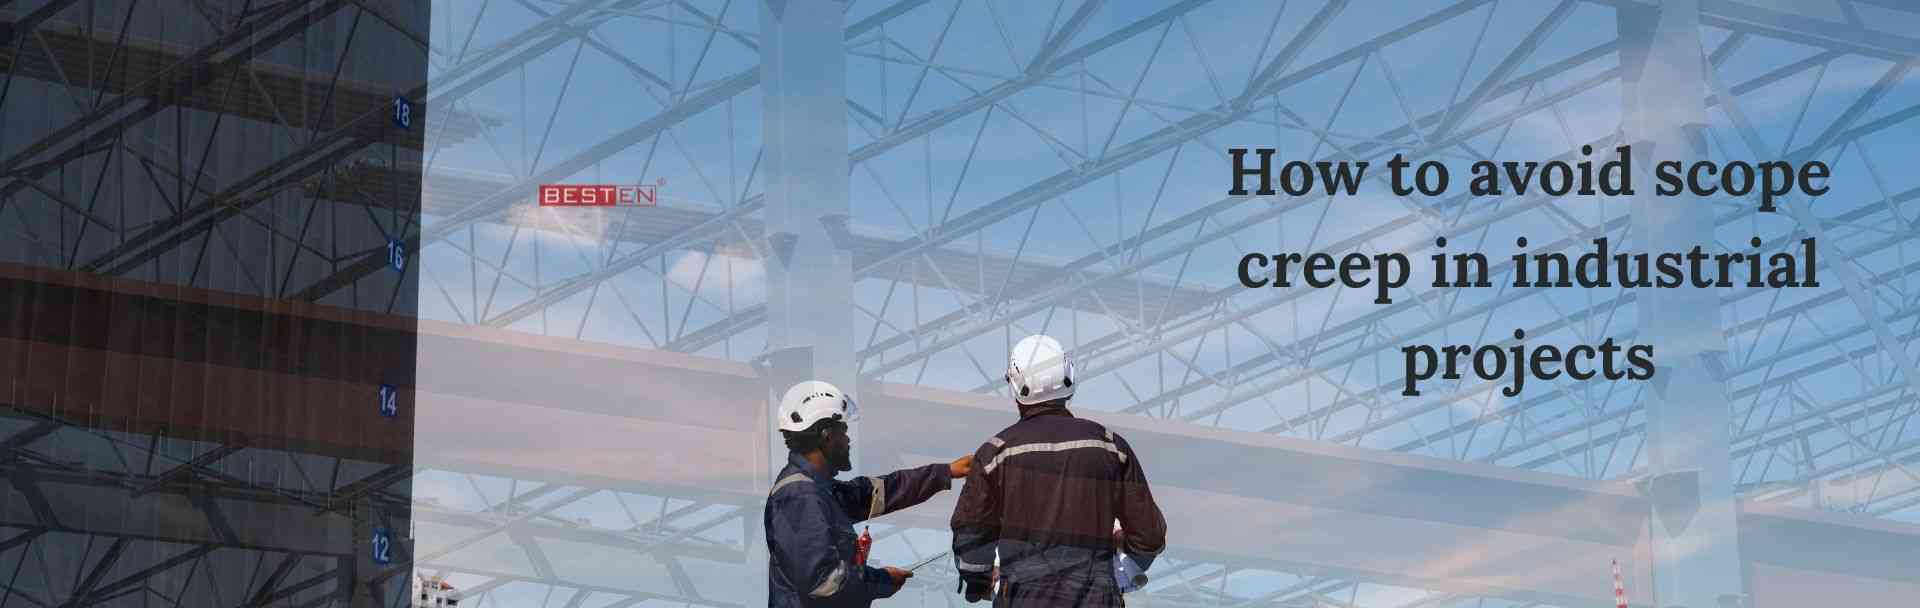 Architects and consultants for industrial projects